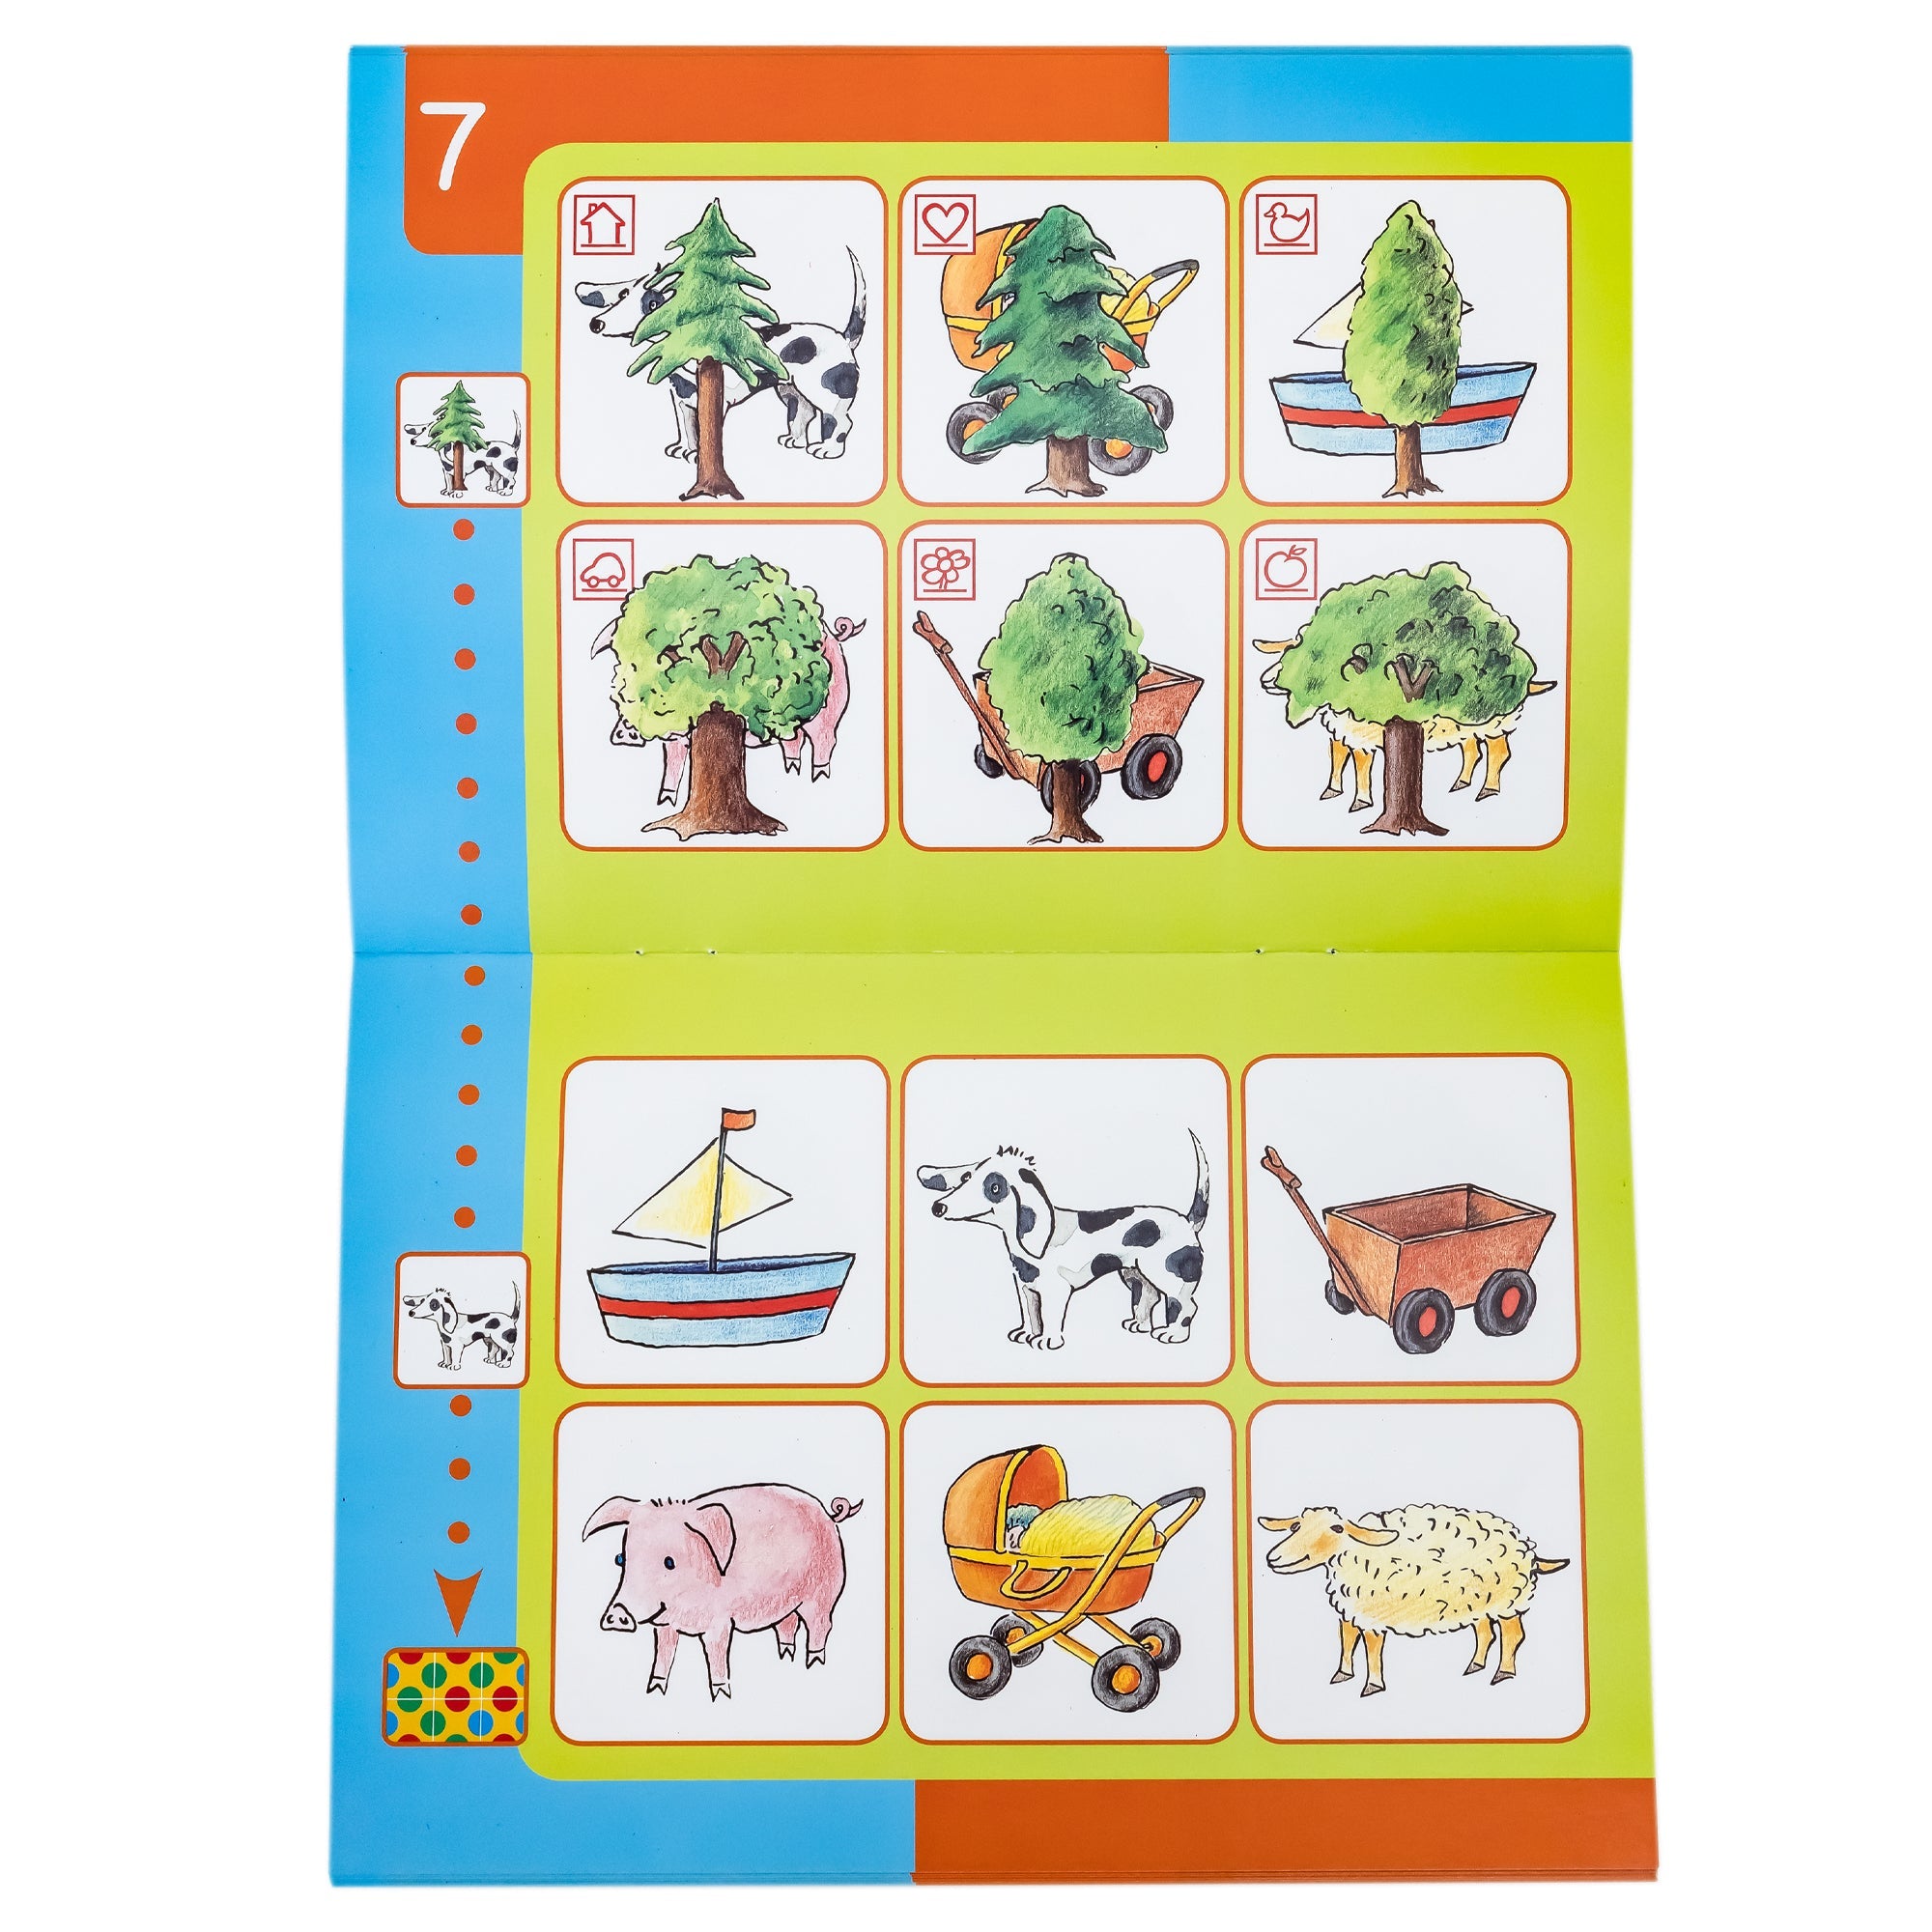 A Bambino L U K book open to show illustrations. The top portion shows 6 tile images of an object hidden behind a tree. On the bottom page, it shows 6 tiles of objects that are hidden behind the trees above. The objects are a boat, dog, wagon, pig, a baby carriage, and a sheep. The pages are blue, green, and orange.